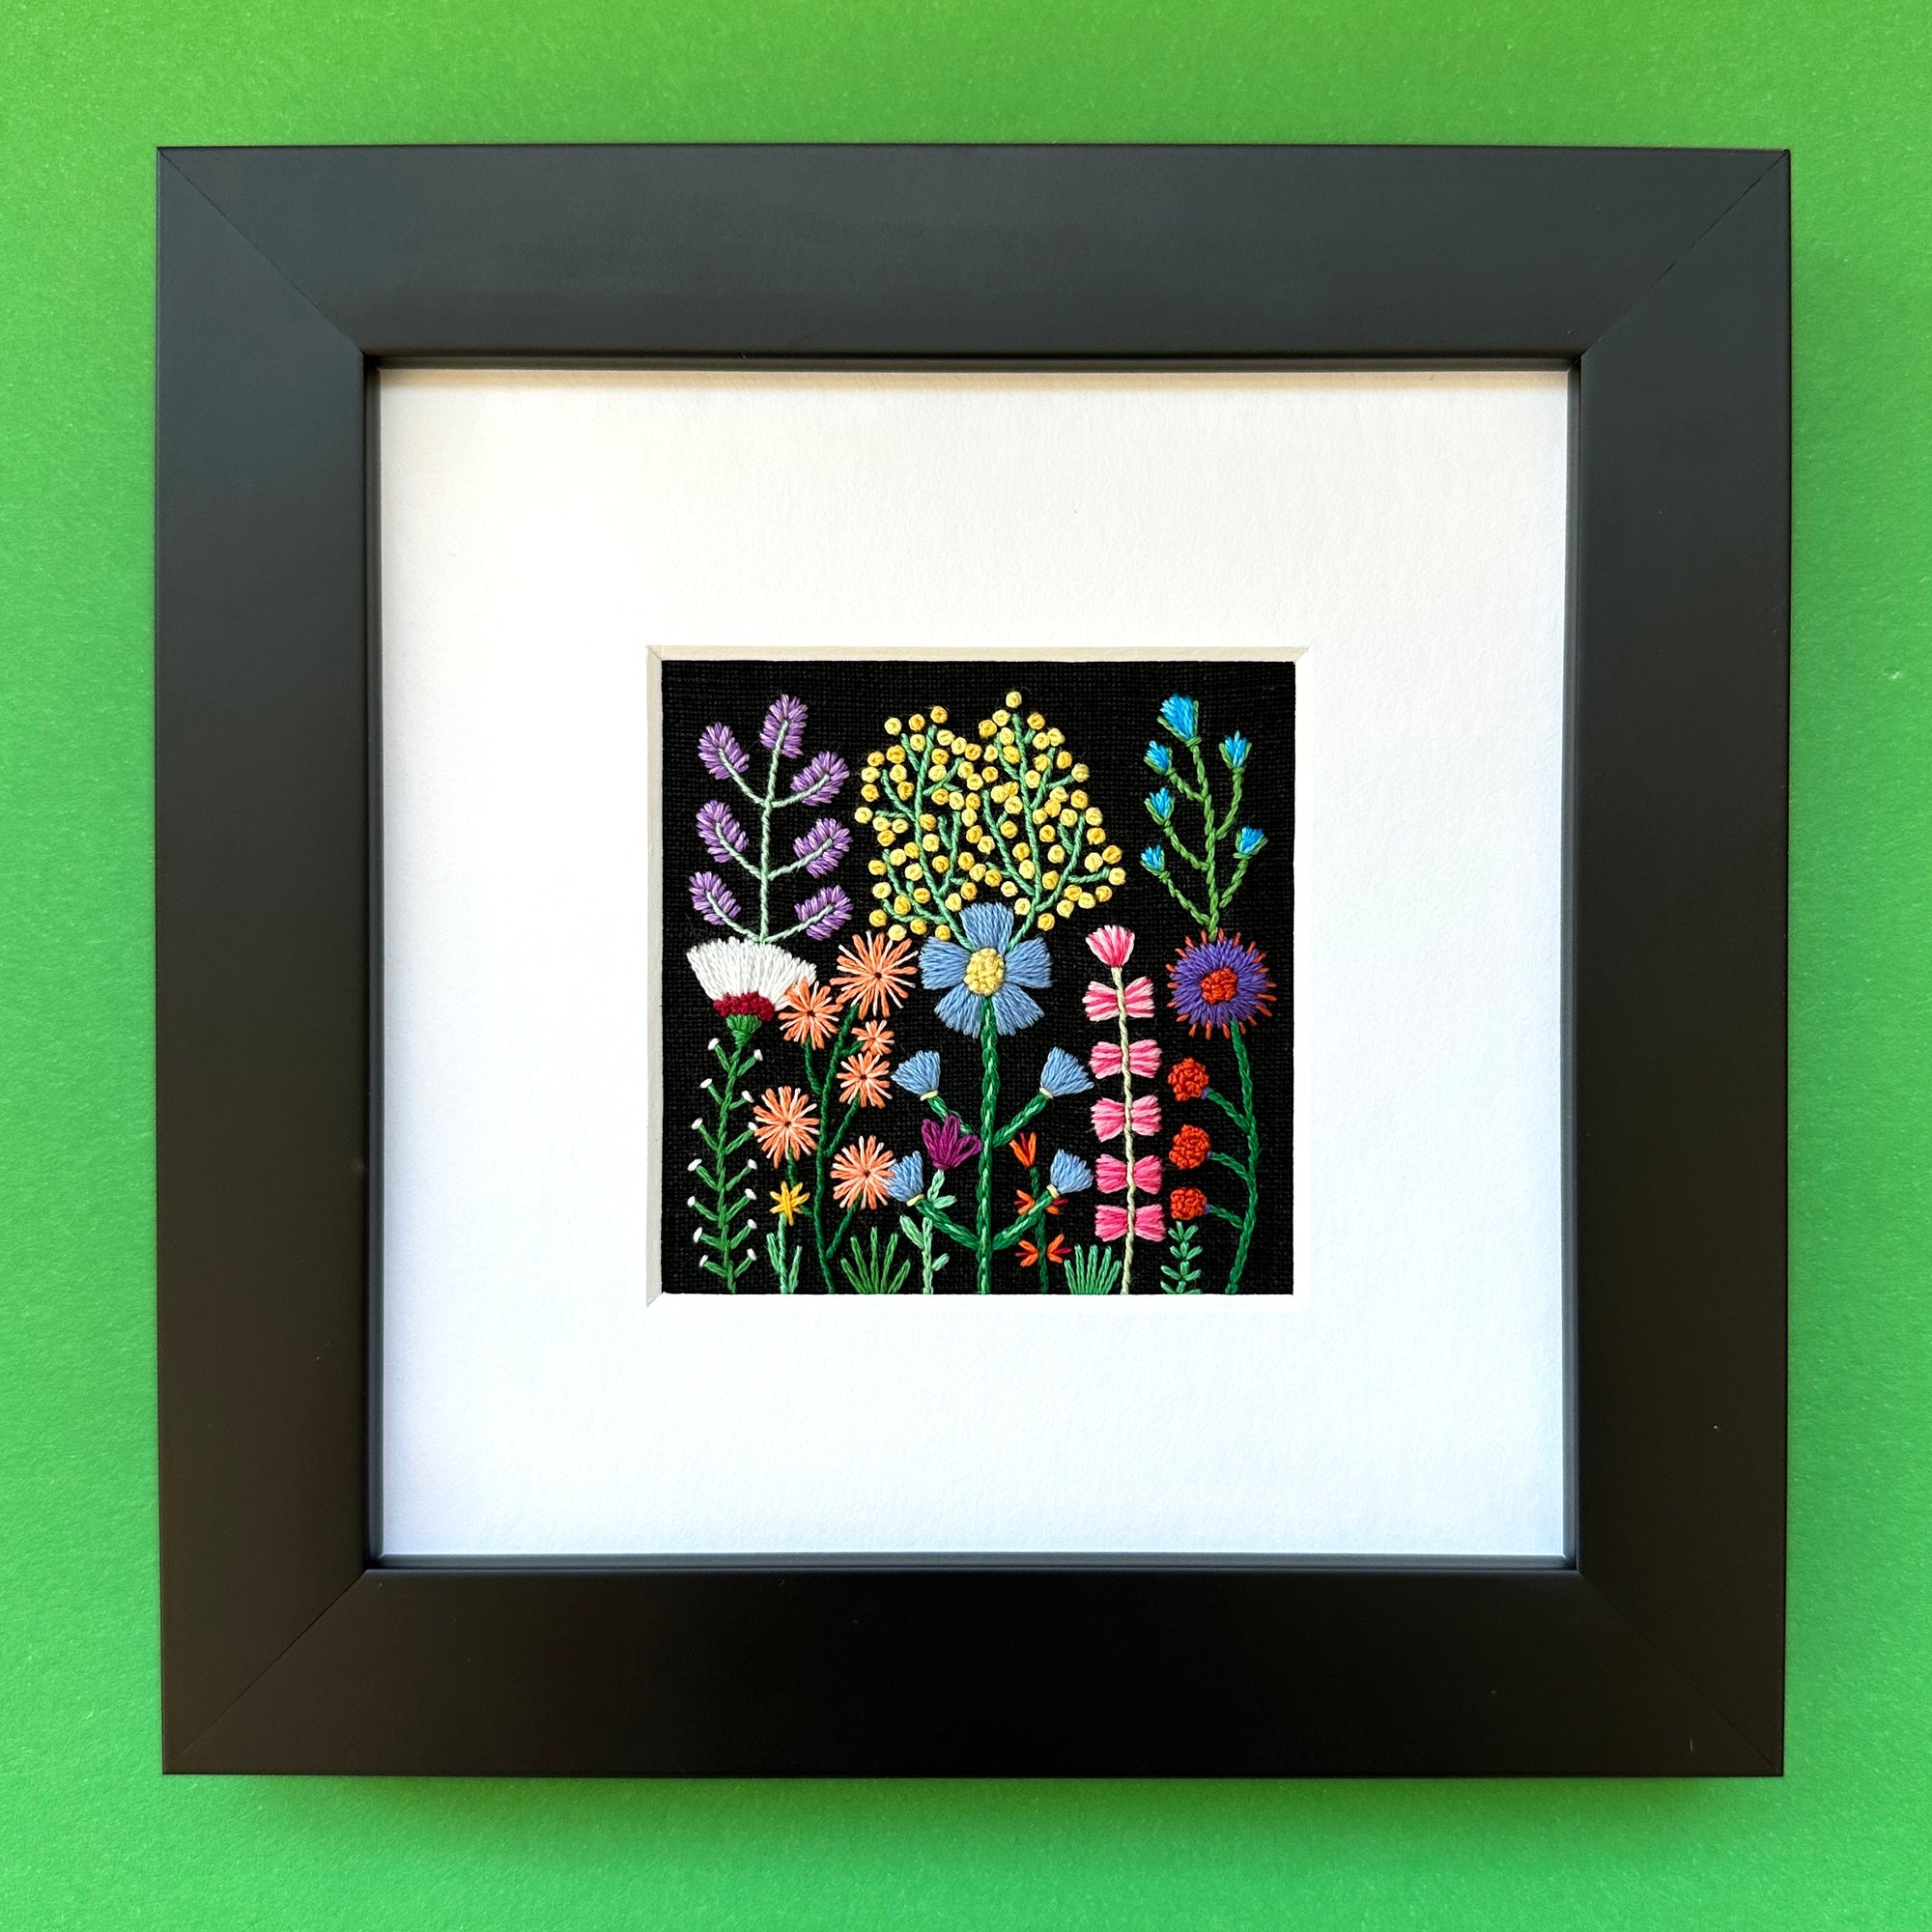 Rainbow Flowers B (2.5" Square) on Black Linen Hand Embroidered Art